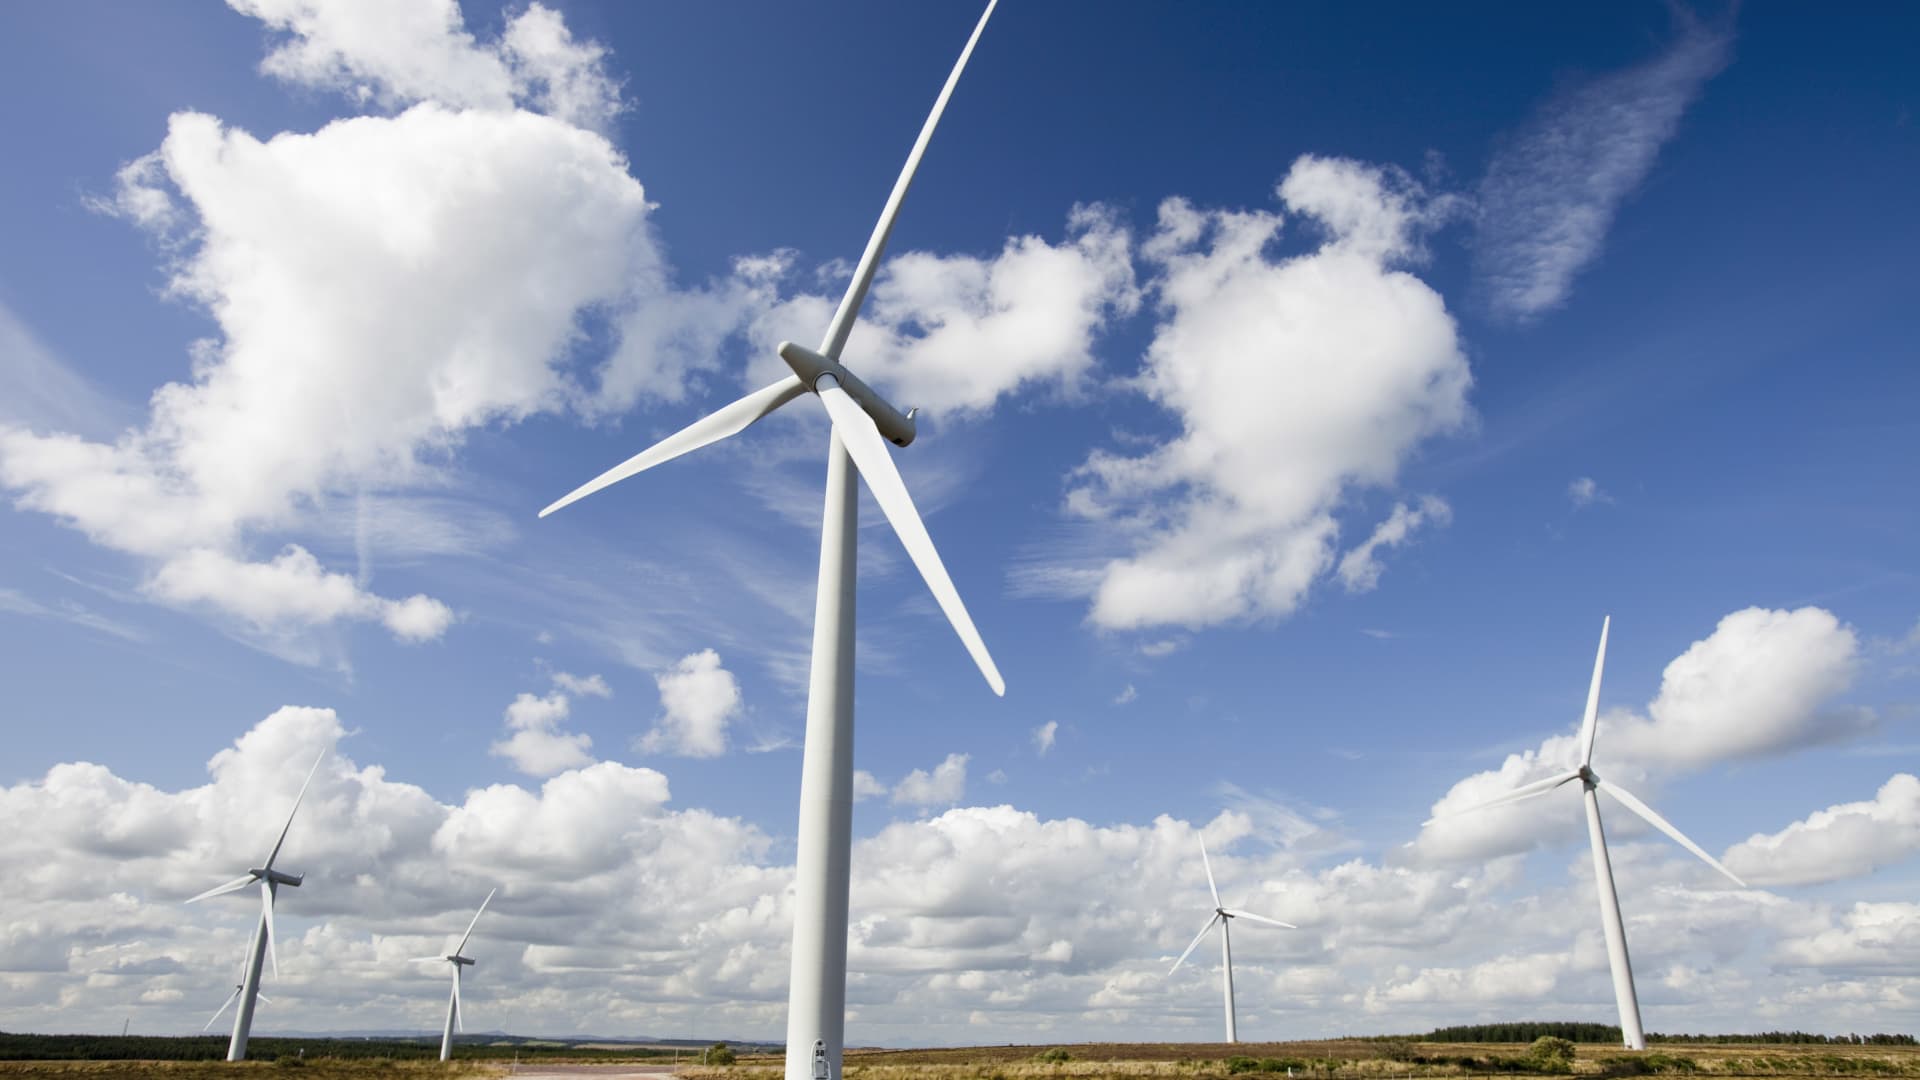 Scotland just produced enough wind energy to power all its homes twice over